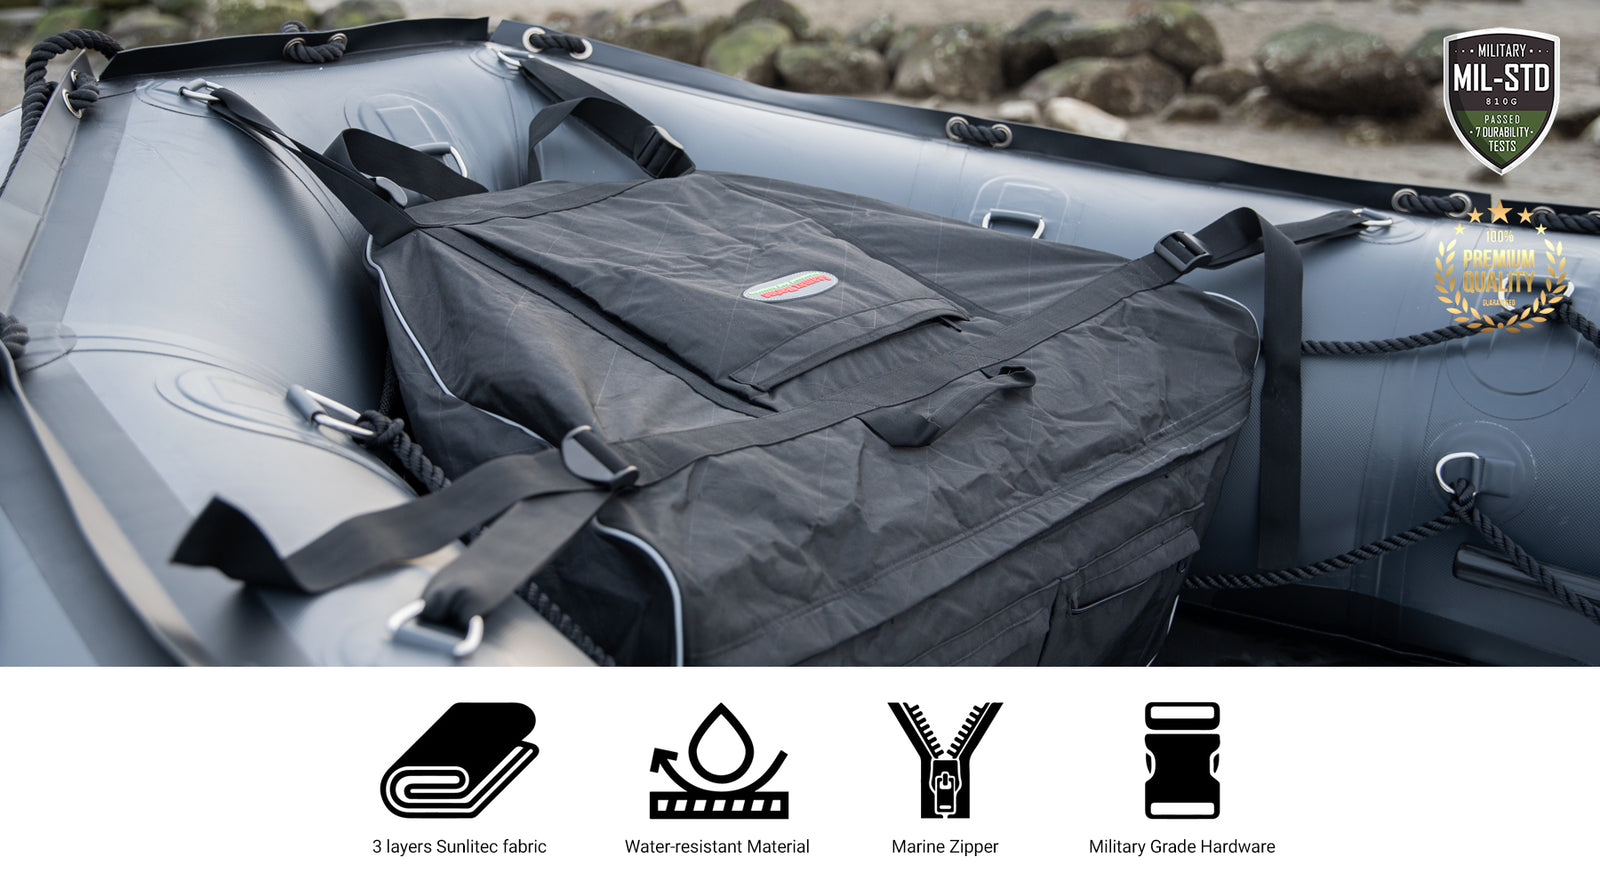 Seamax Sunlitec Front Accessory Storage Bow Bag for Inflatable Boat -  Seamax Marine